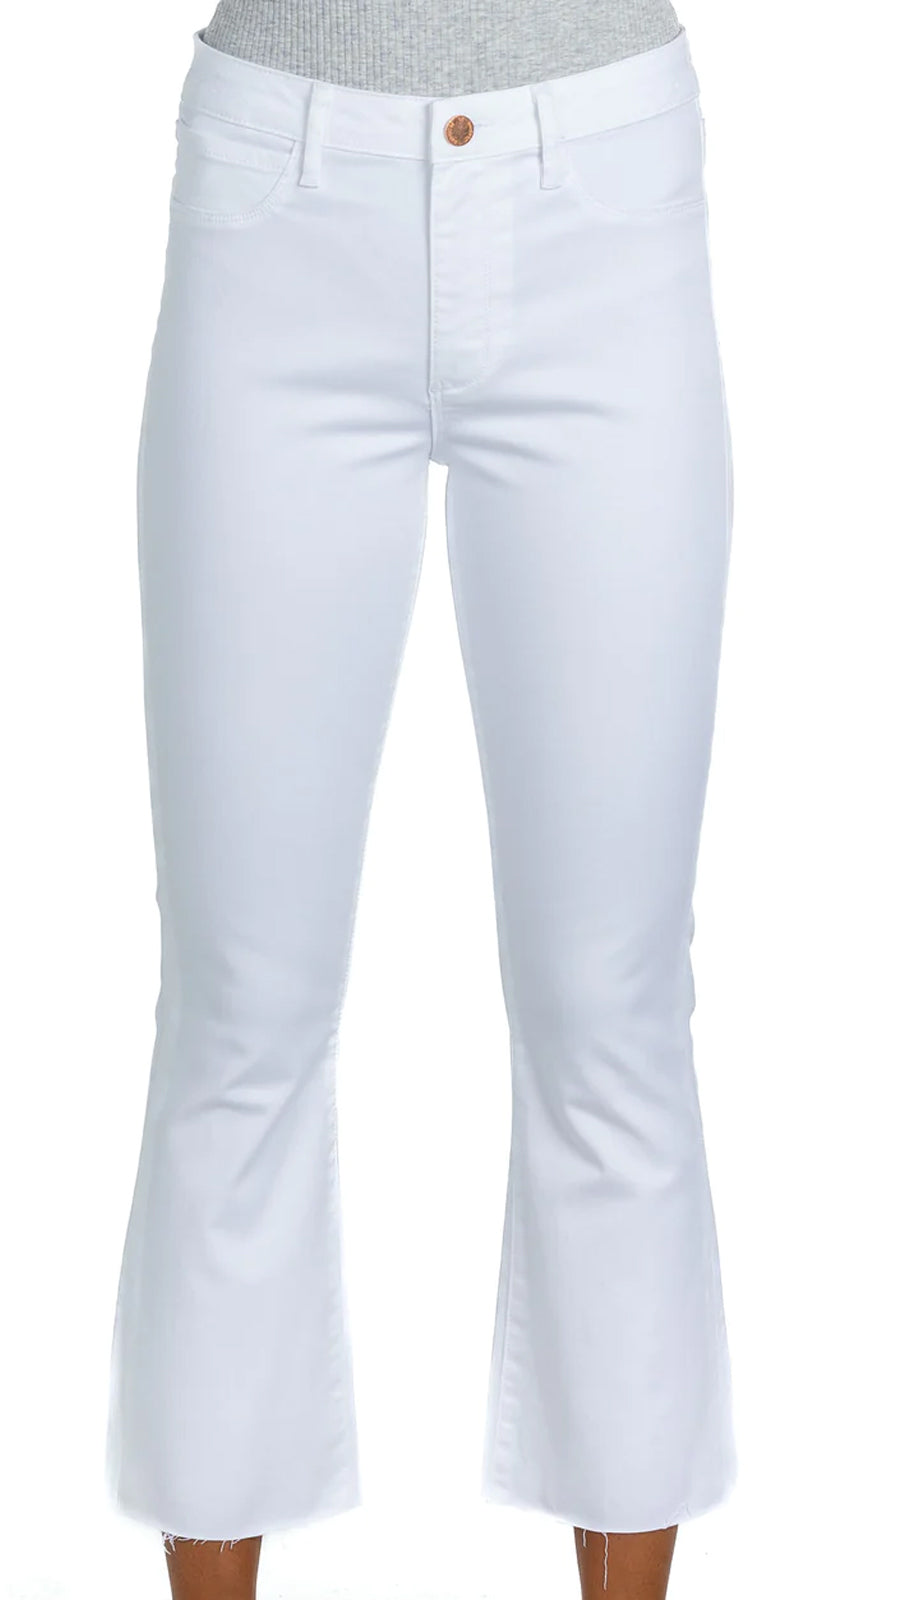 SAUSALITO WHITE CROPPED JEANS